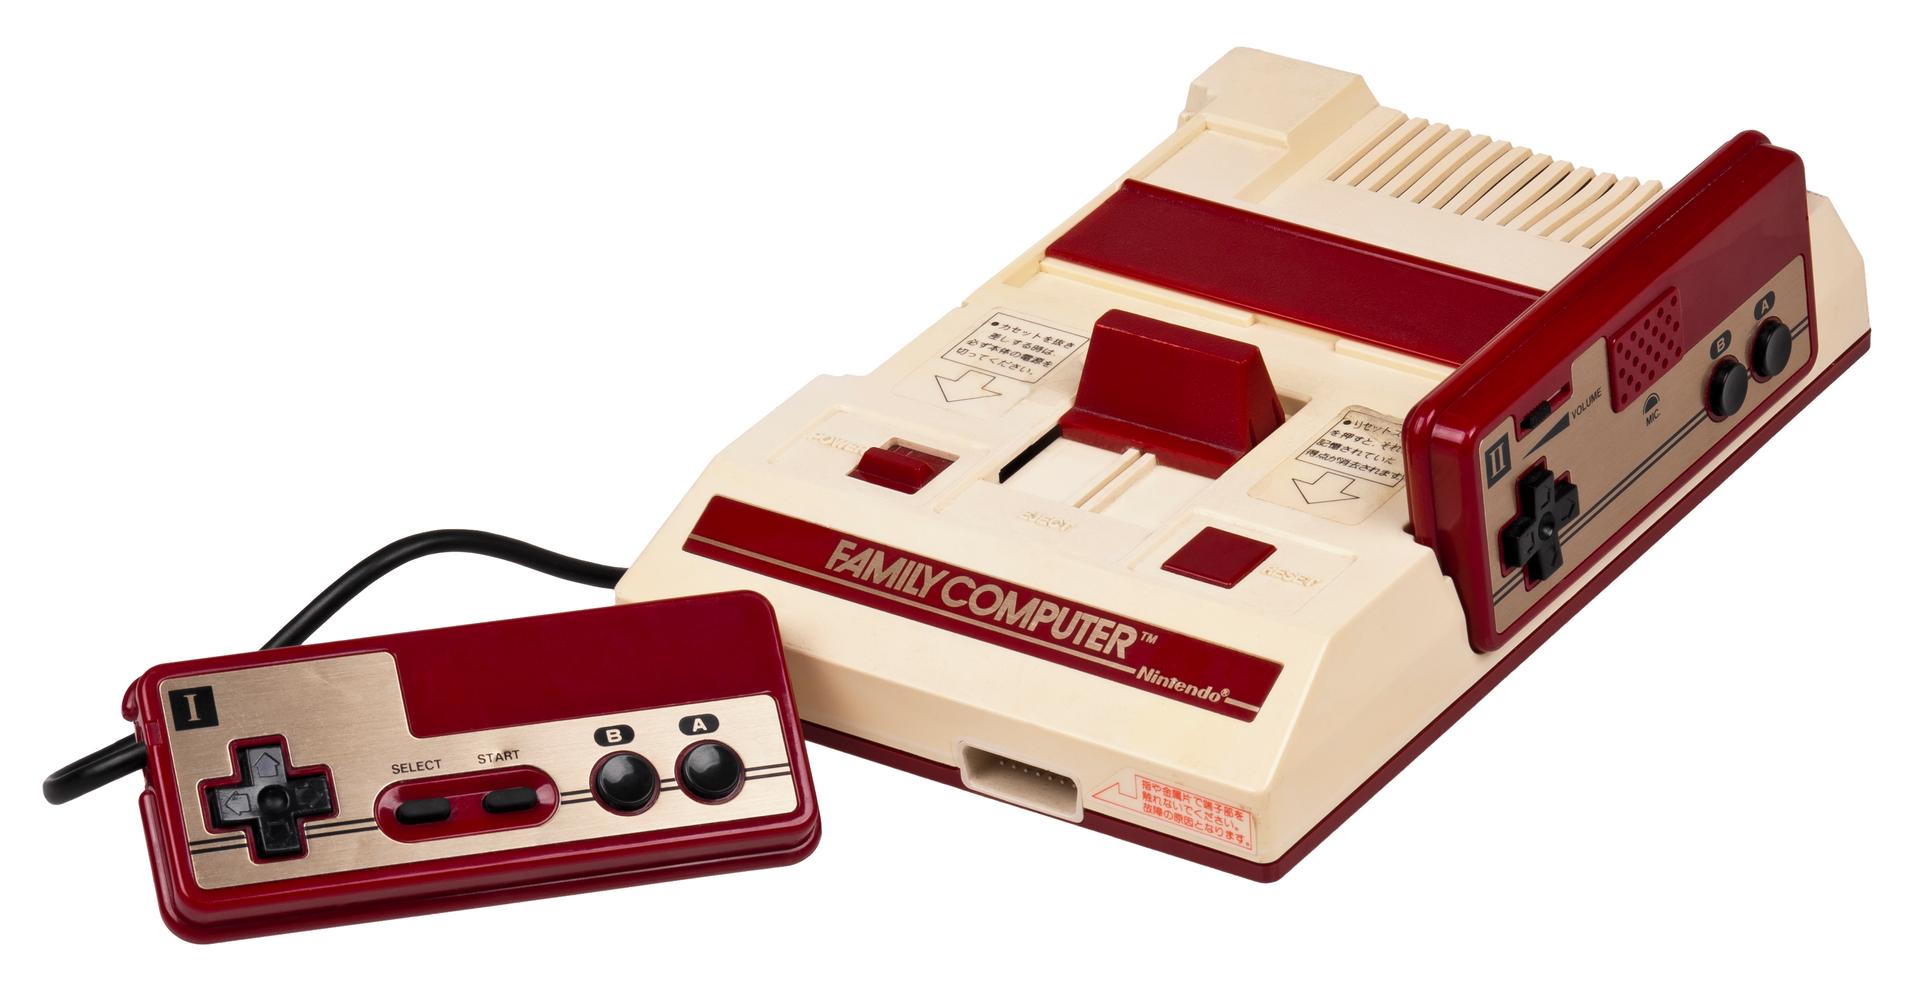 A Japanese Famicom (short for "Family Computer") video game console made by Nintendo. 